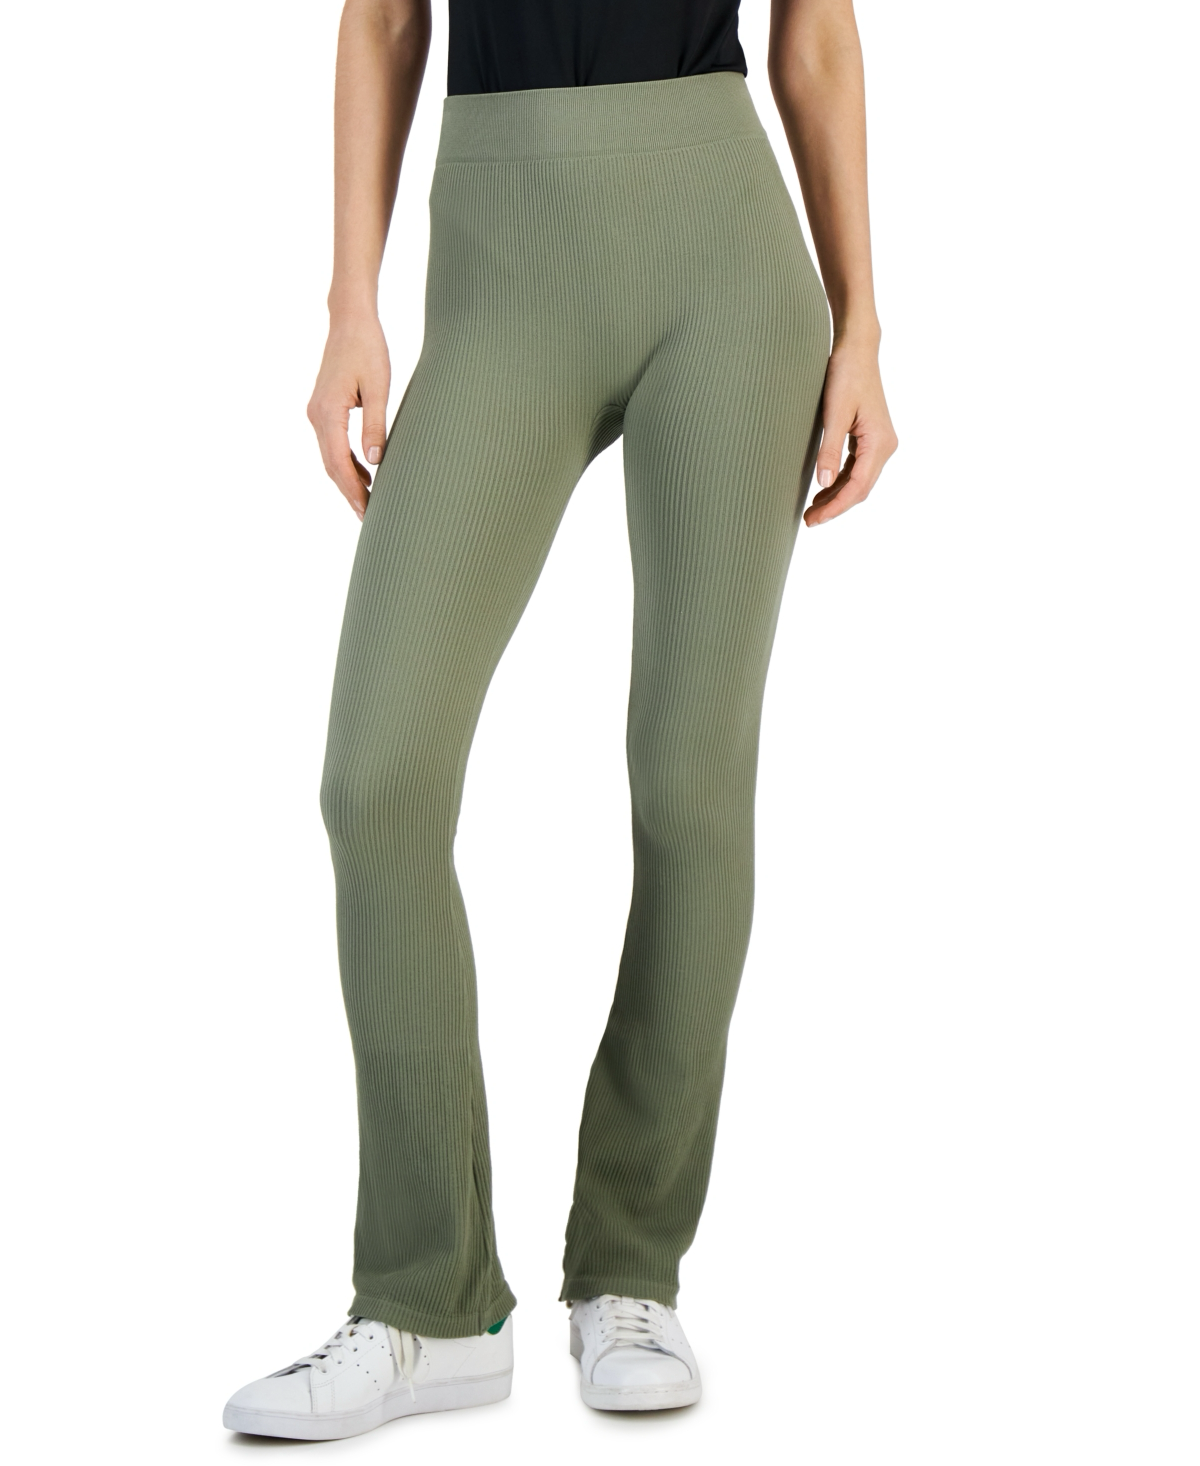 JUNIORS' SEAMLESS FLARE-HEM LEGGINGS IN SMOKEY OLIVE Take your leggings game to new heights of style and comfort with these juniors' leggings from Hippie Rose. Juniors Juniors' Clothing - Leggings & Pants (new)